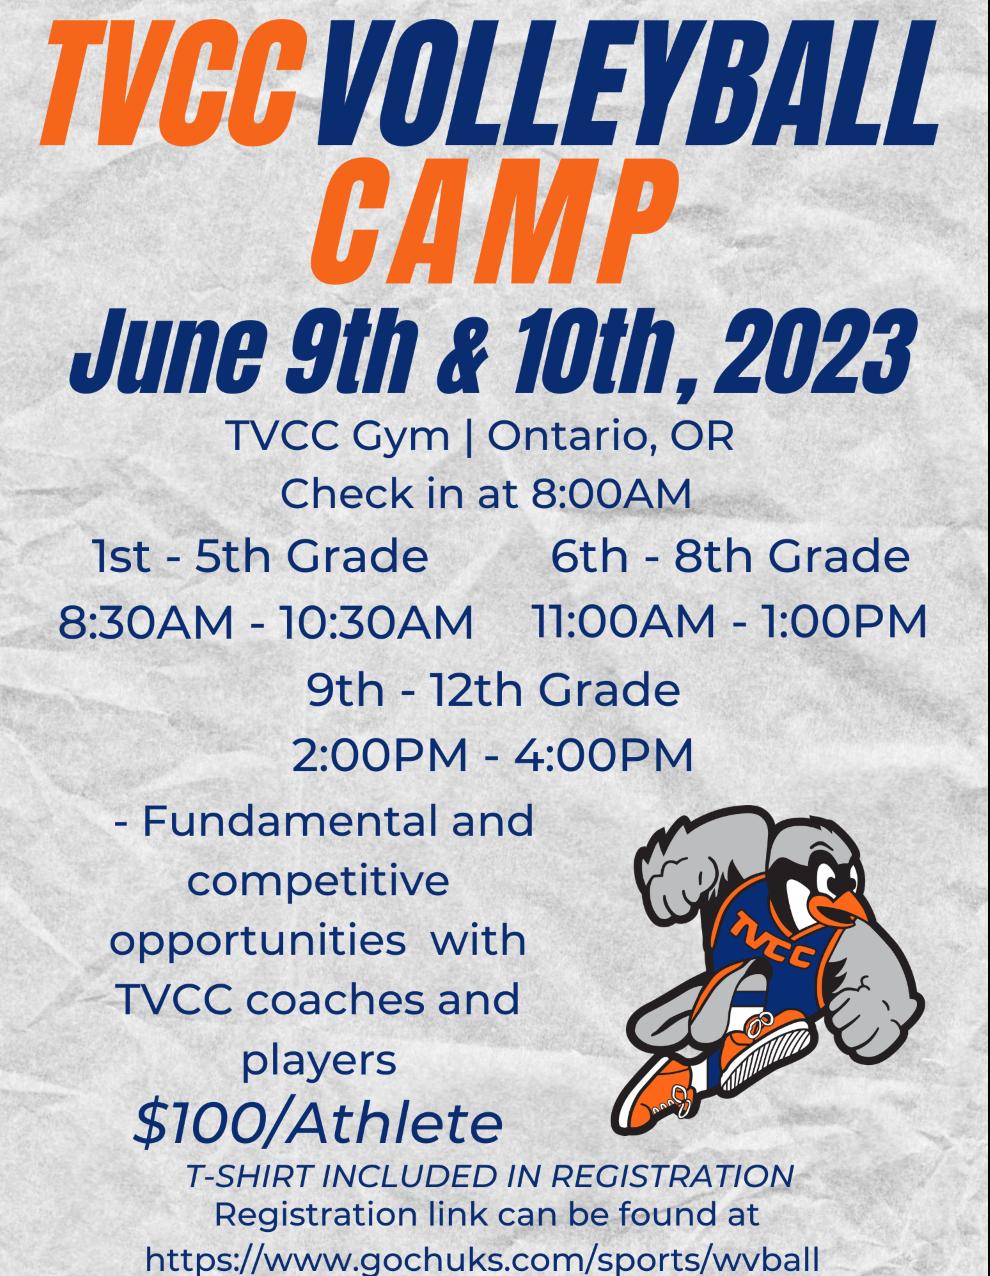 Chukar Volleyball Set to Host Camp for 1st-12th Graders